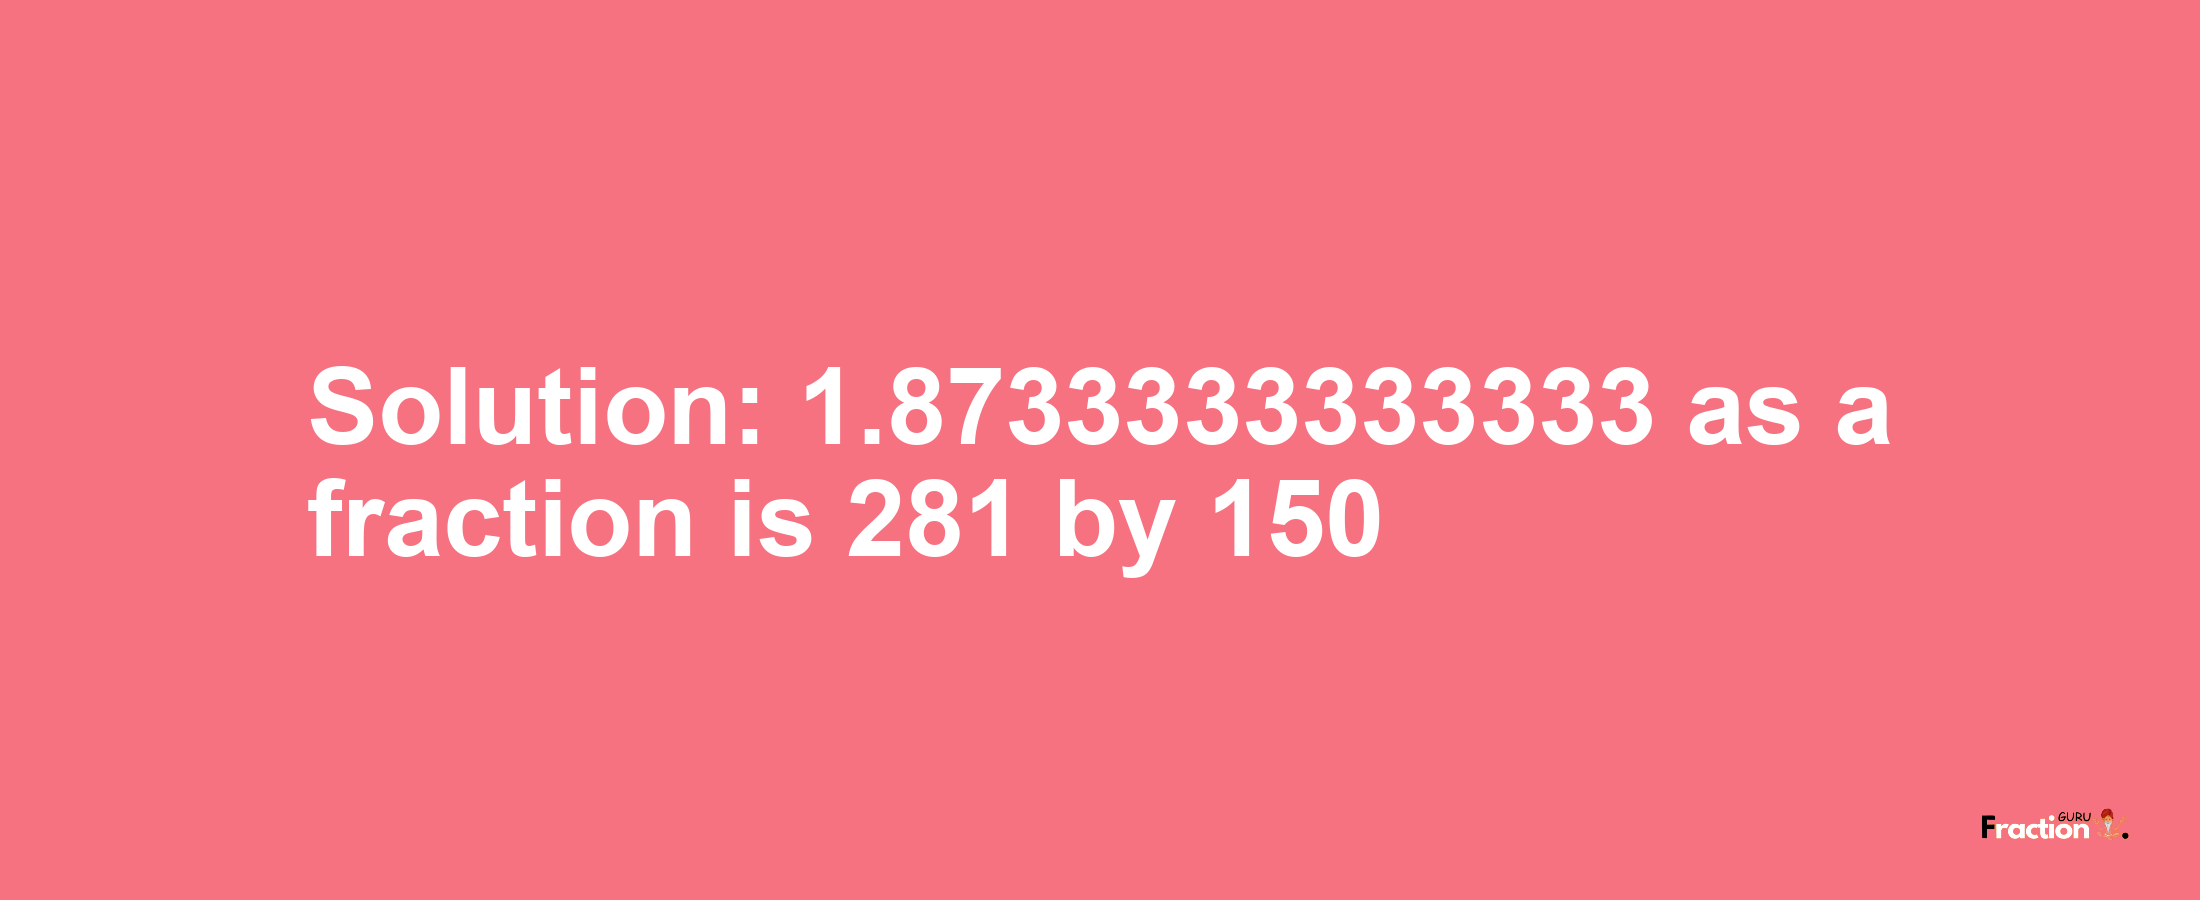 Solution:1.8733333333333 as a fraction is 281/150